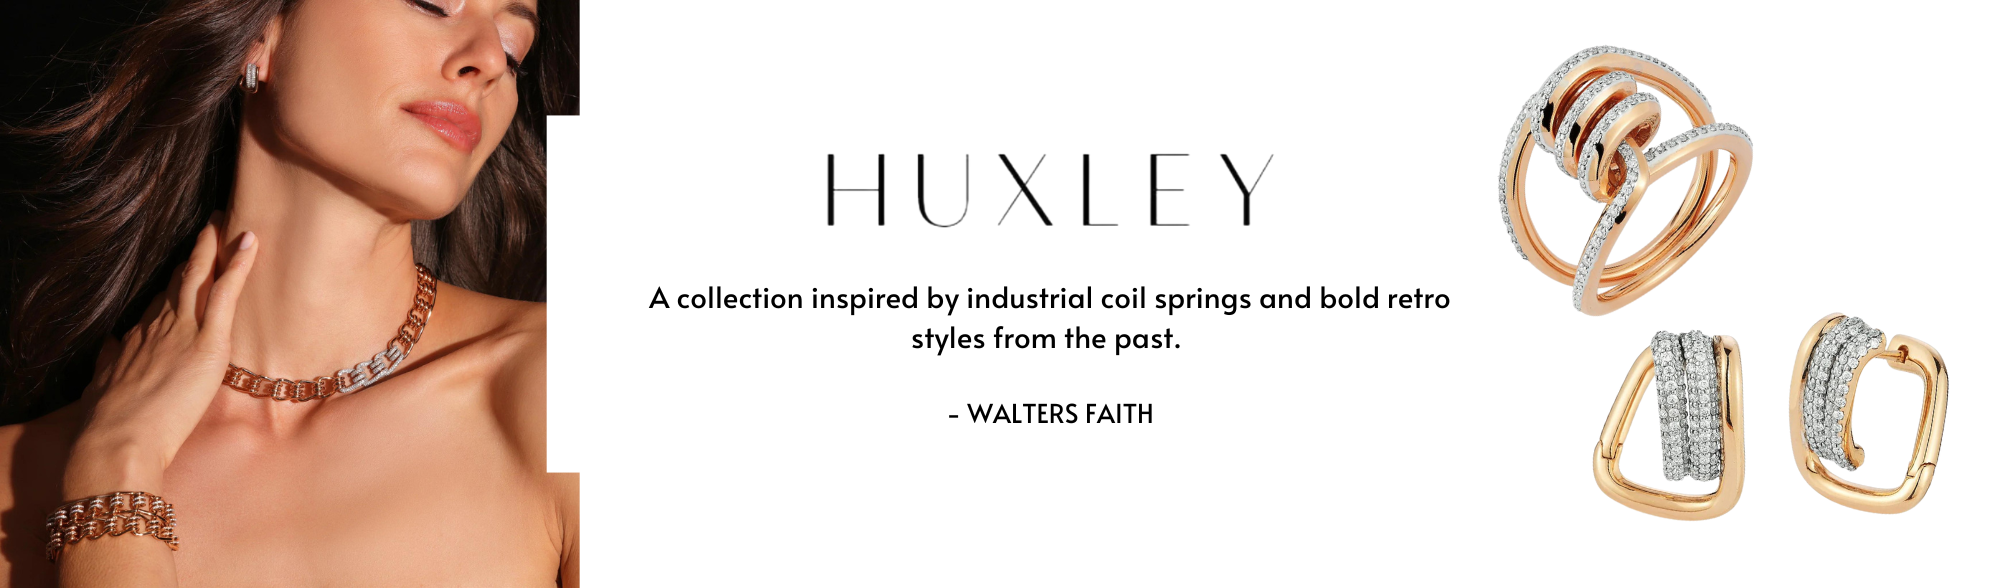 huxley-collection-banner-new.png